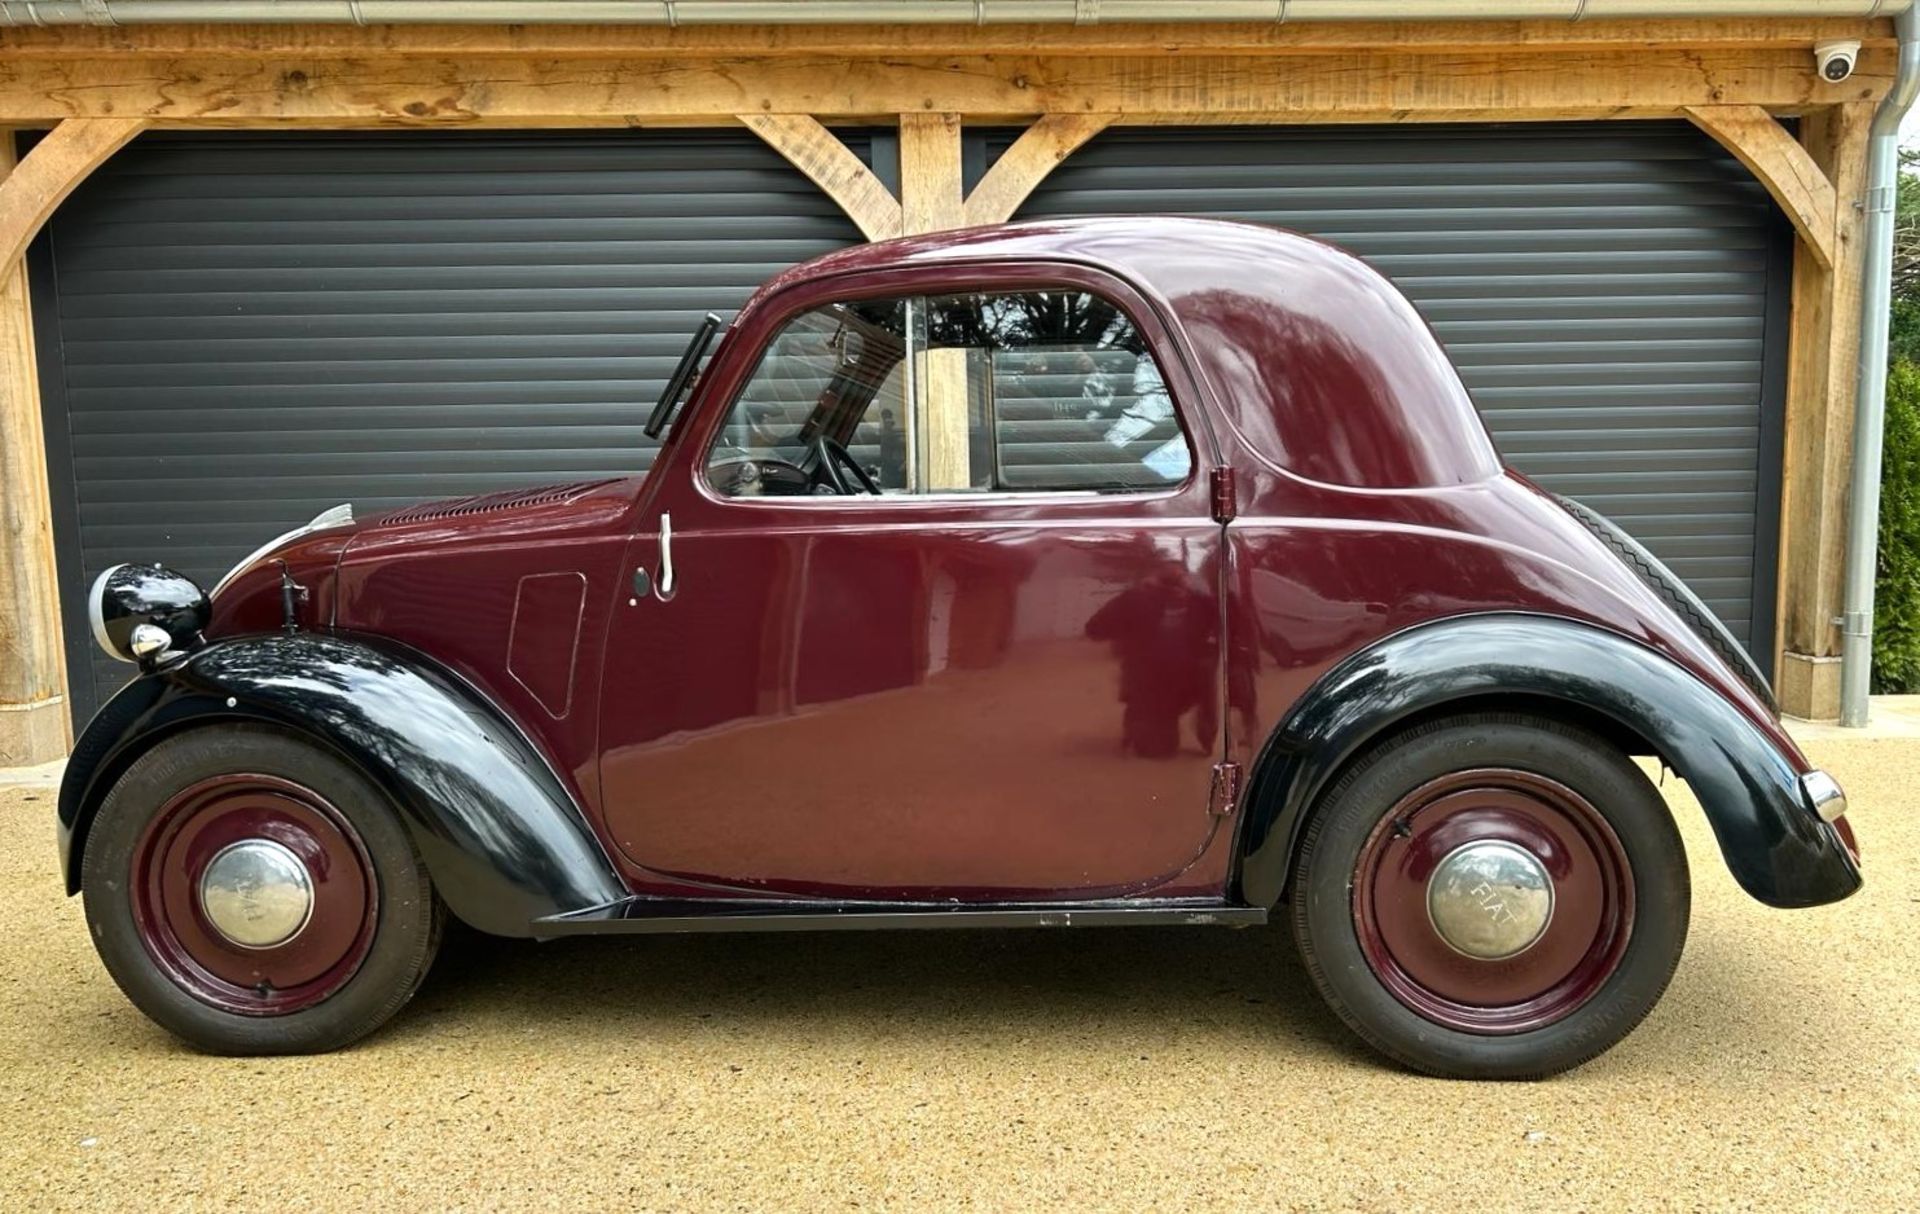 1937 FIAT TOPOLINO Registration Number: TBA Chassis Number: 516289 Recorded Mileage: 46,700 - Image 7 of 13